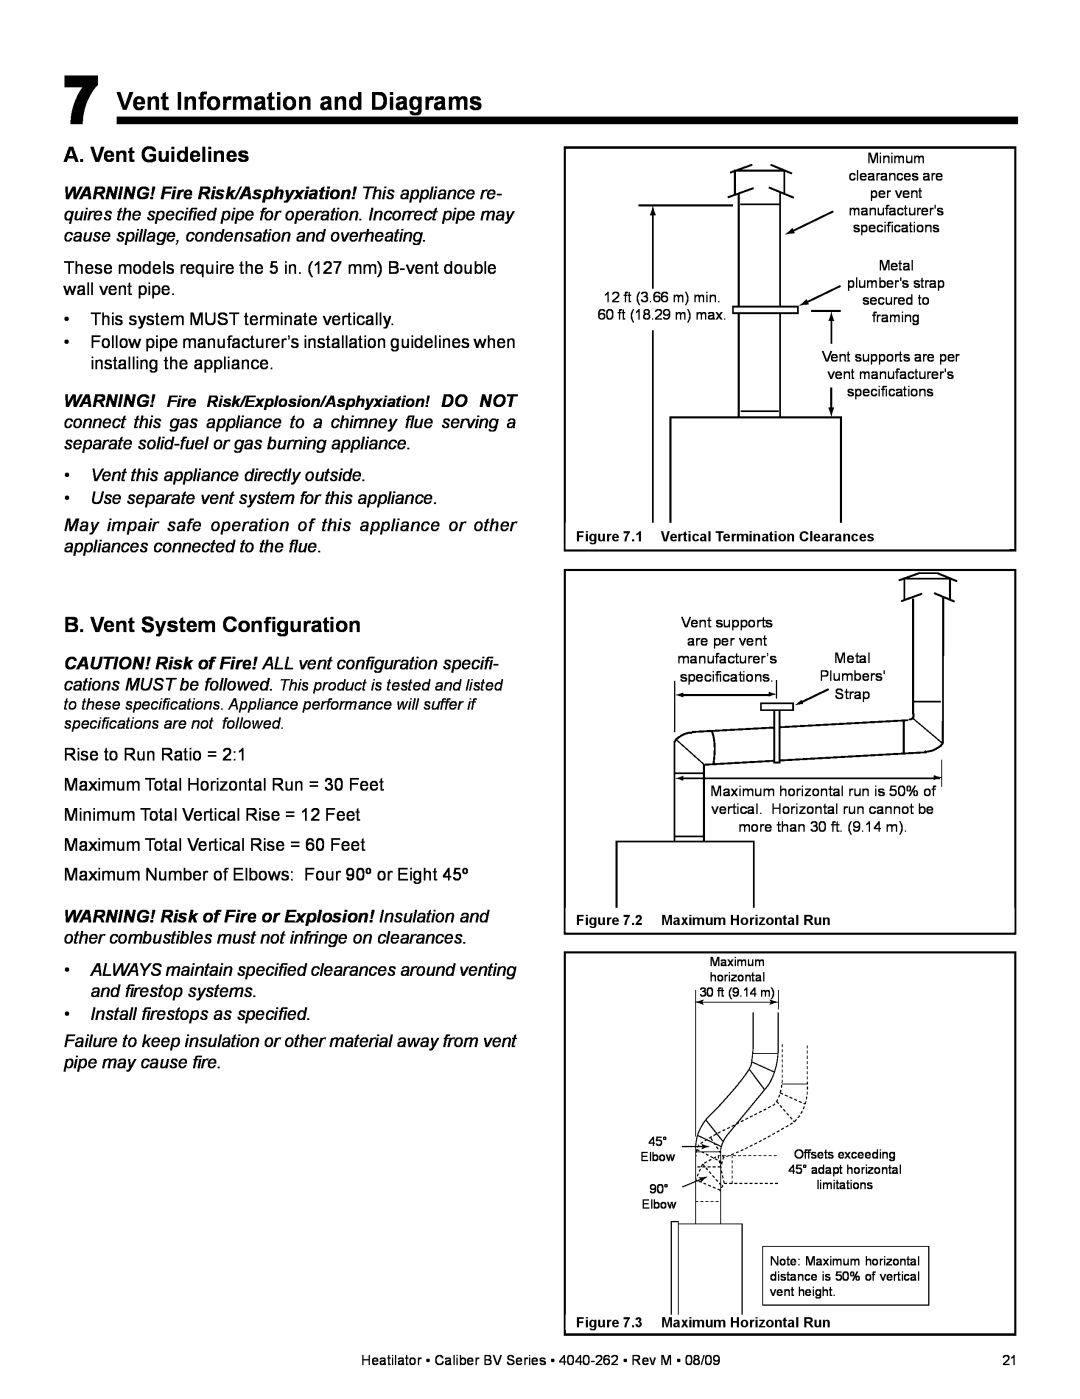 Heatiator CB4842IR, CB4236IR owner manual Vent Information and Diagrams, A. Vent Guidelines, B. Vent System Configuration 